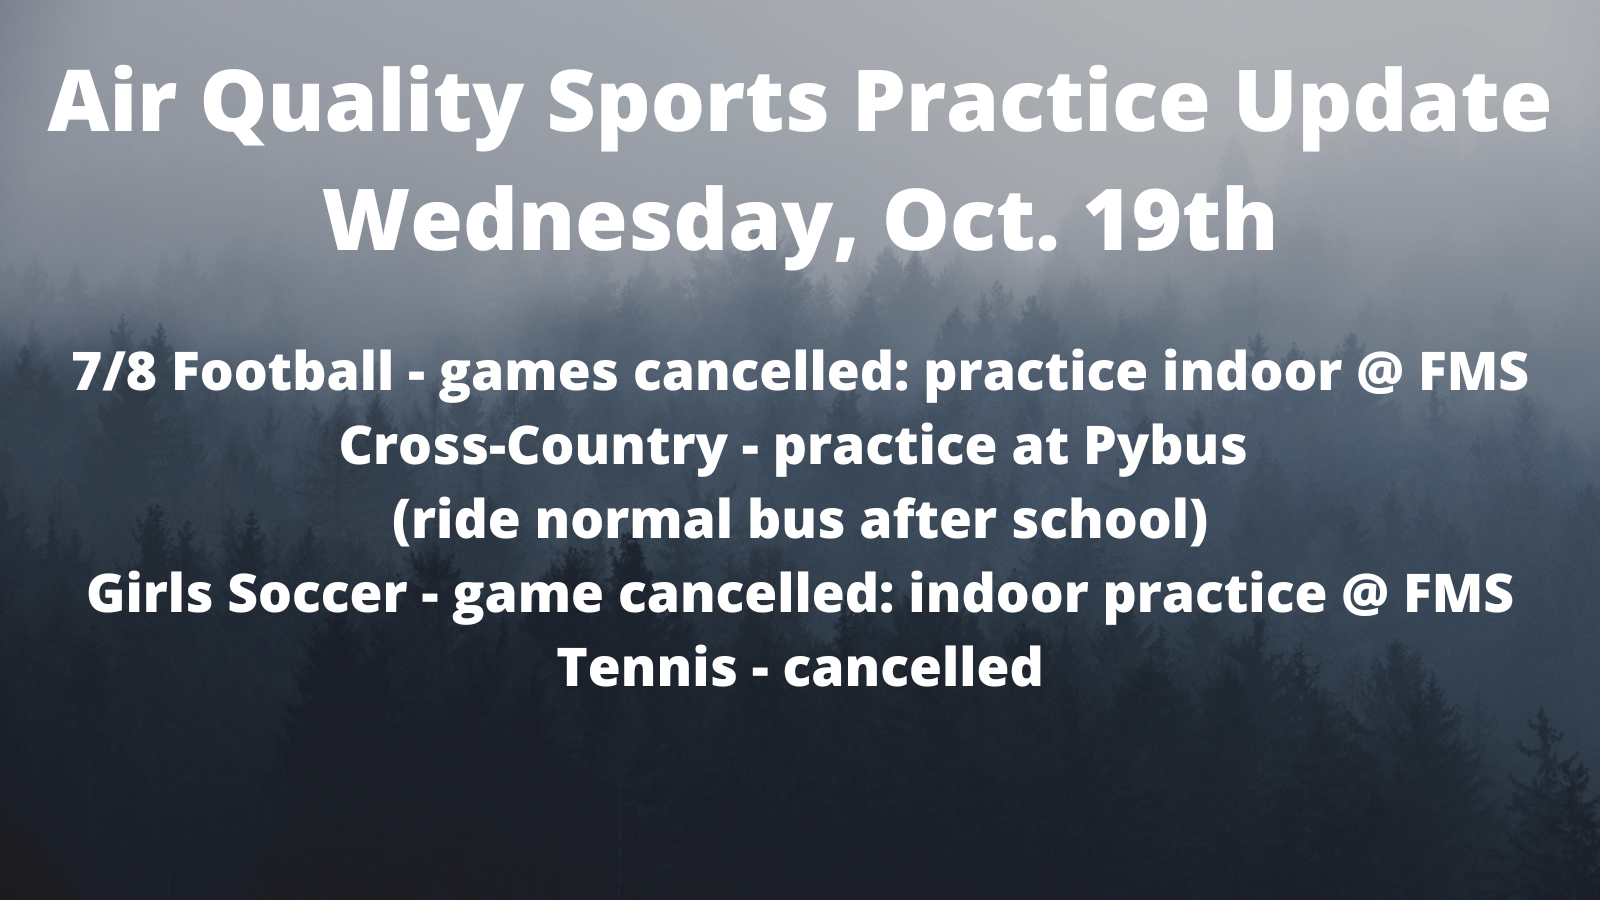 Air Quality & Sports Practice Update